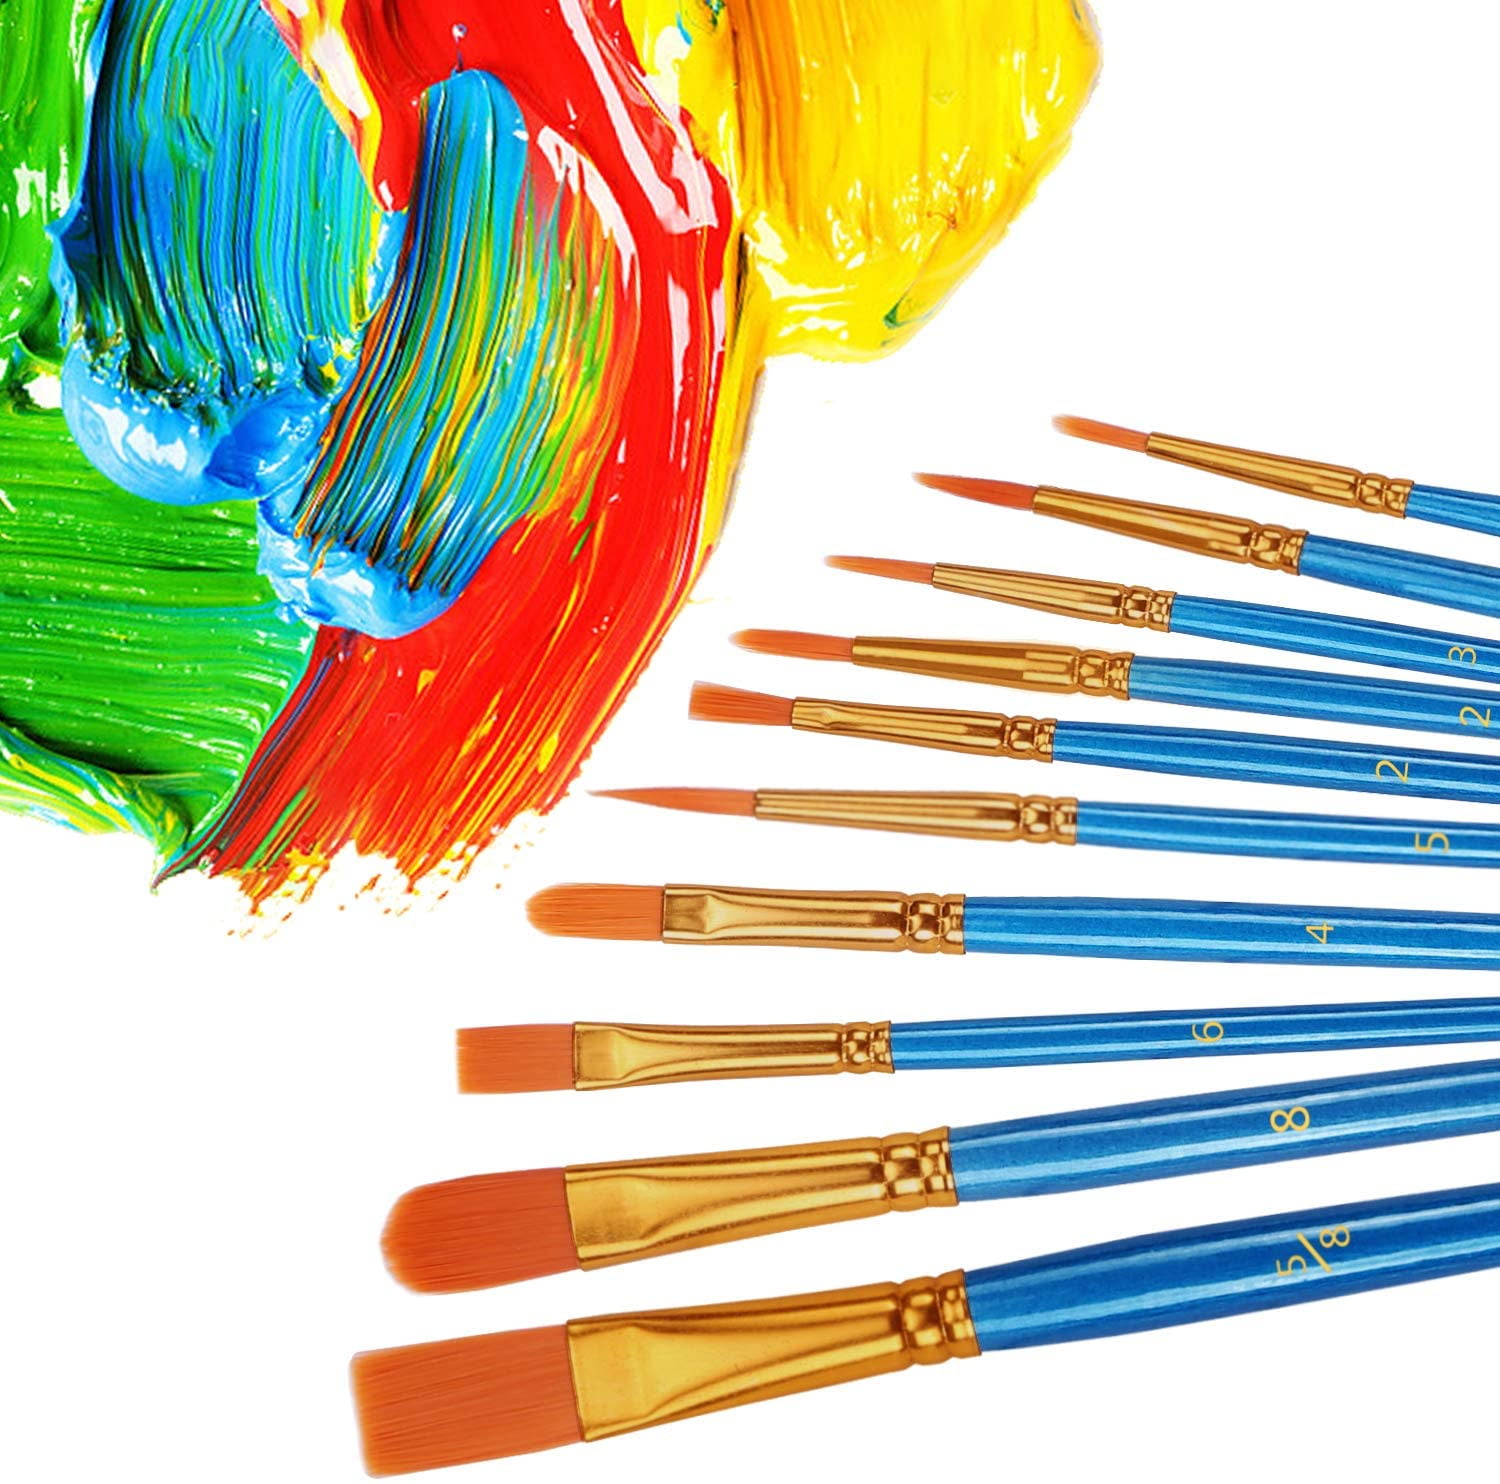 vaola art PB72019 Paint Brush Set for Acrylic Painting Artist Watercolor  Brush Professional Oil Painting Brushes Small Craft, Face Paint Brushes B